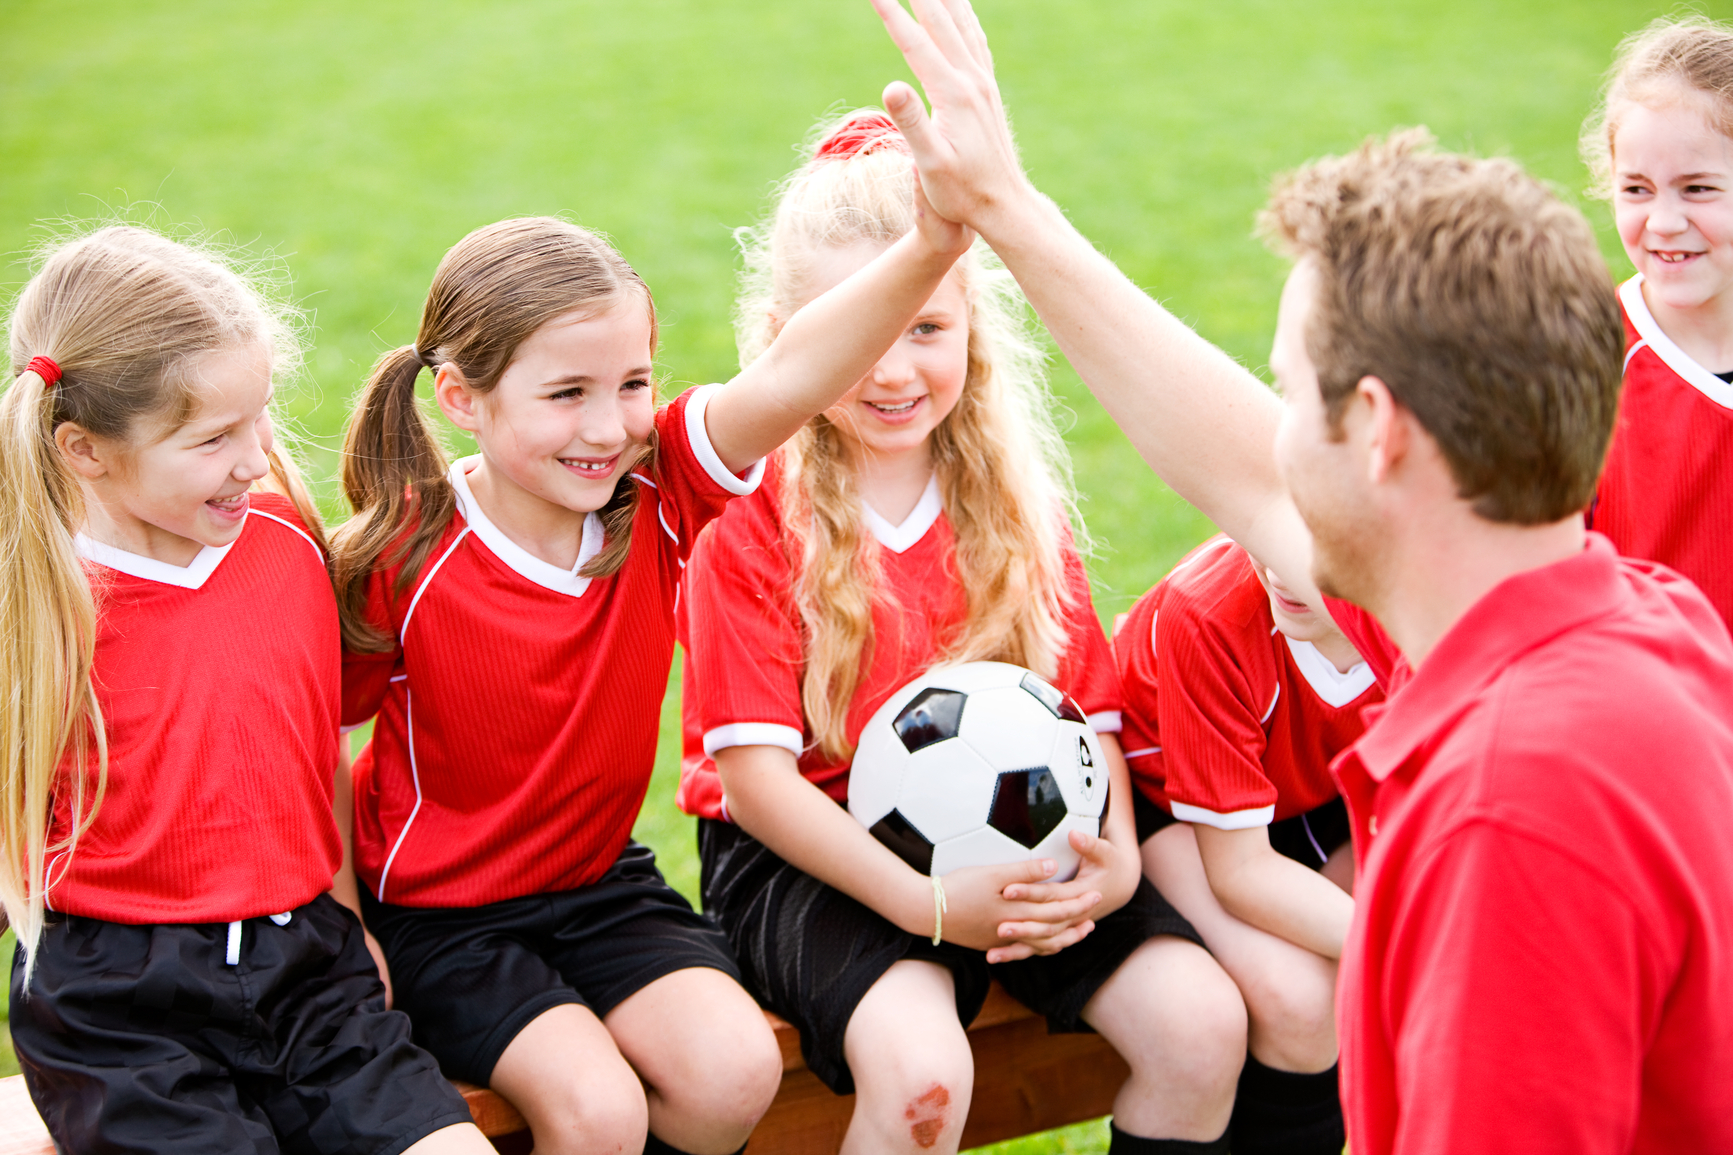 How to encourage children in sports